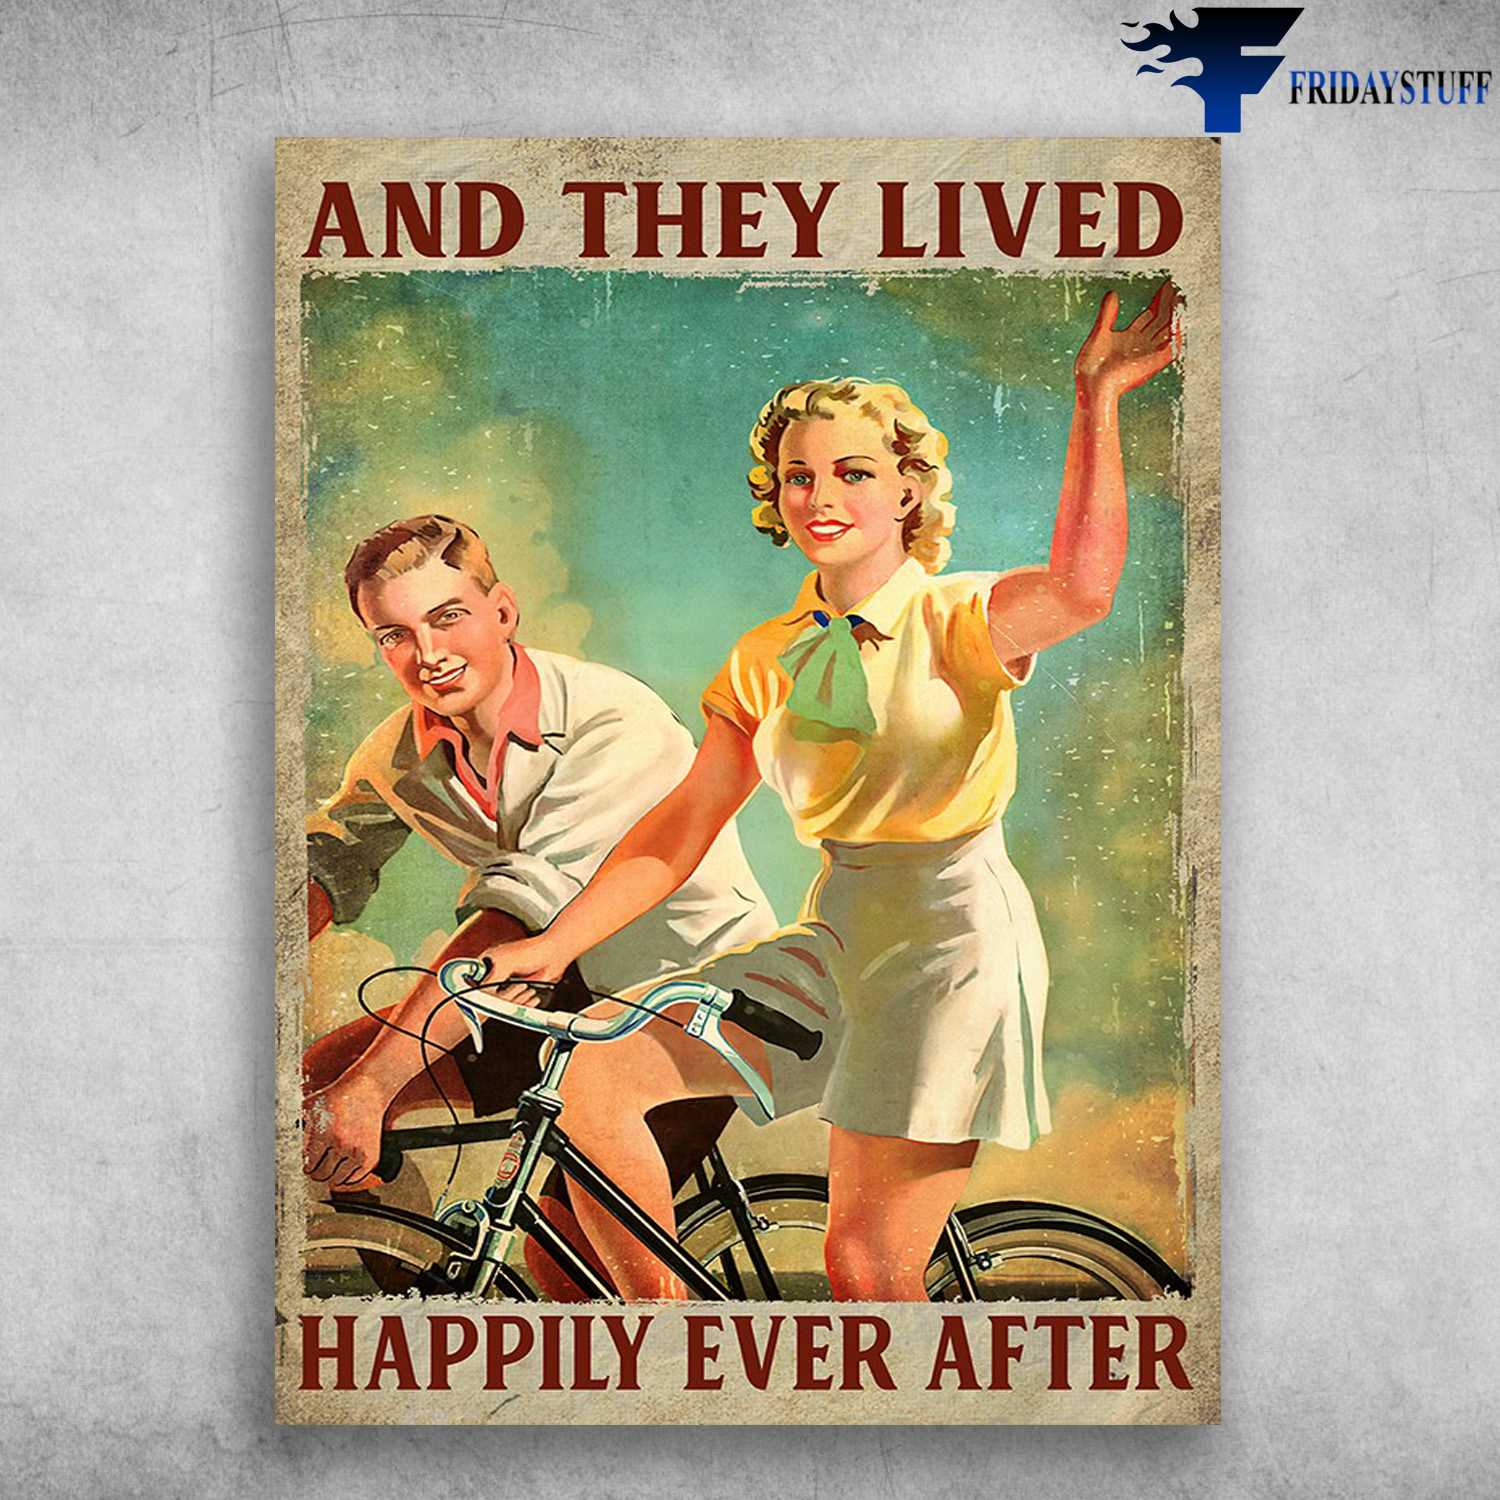 Cycling Couple, Love Poster - And They Lived, Happily Ever After